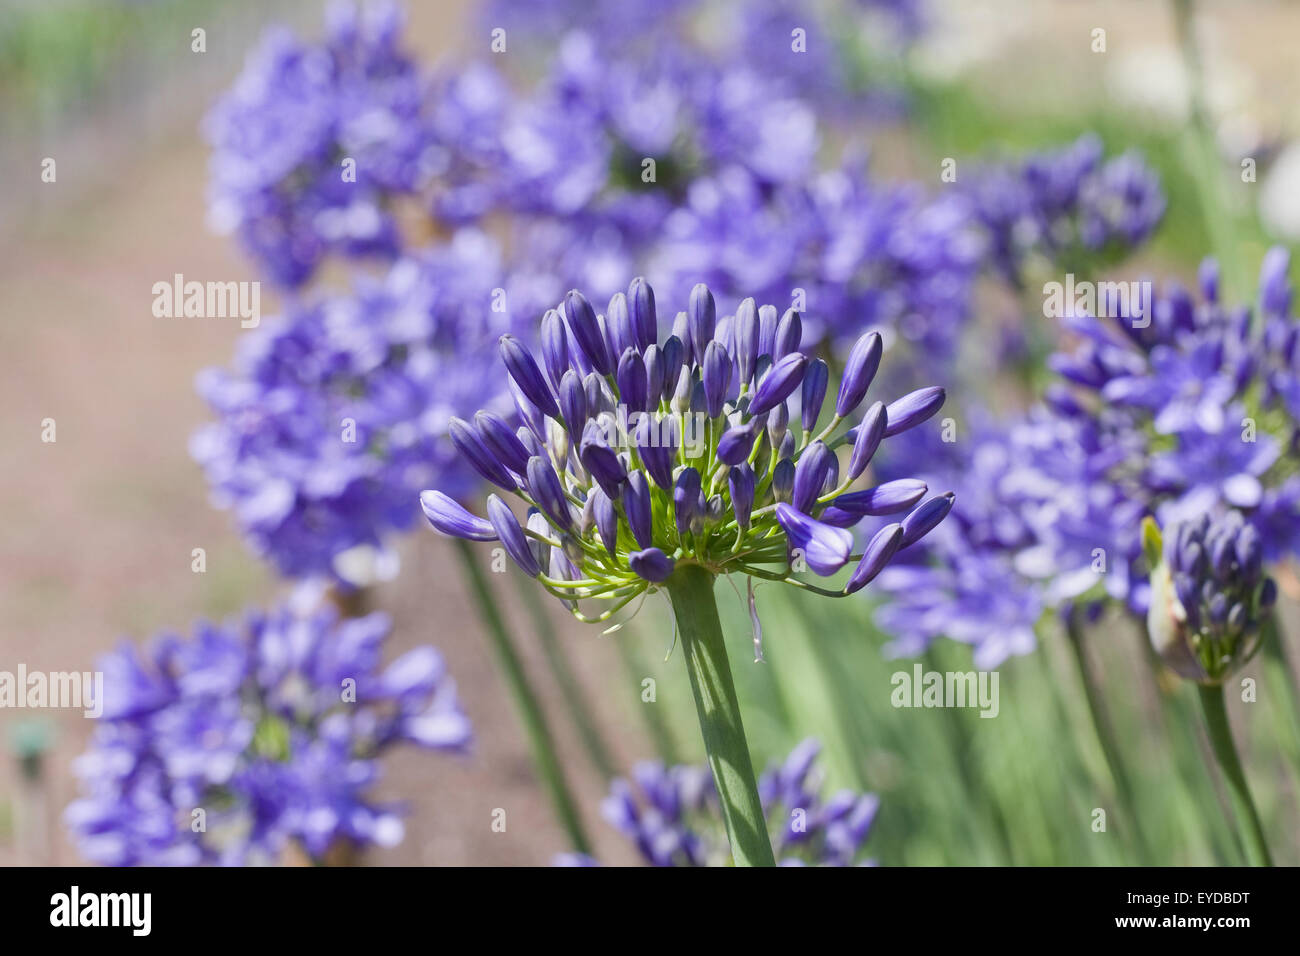 Agapanthus 'Lyn Valley' flowers. Stock Photo